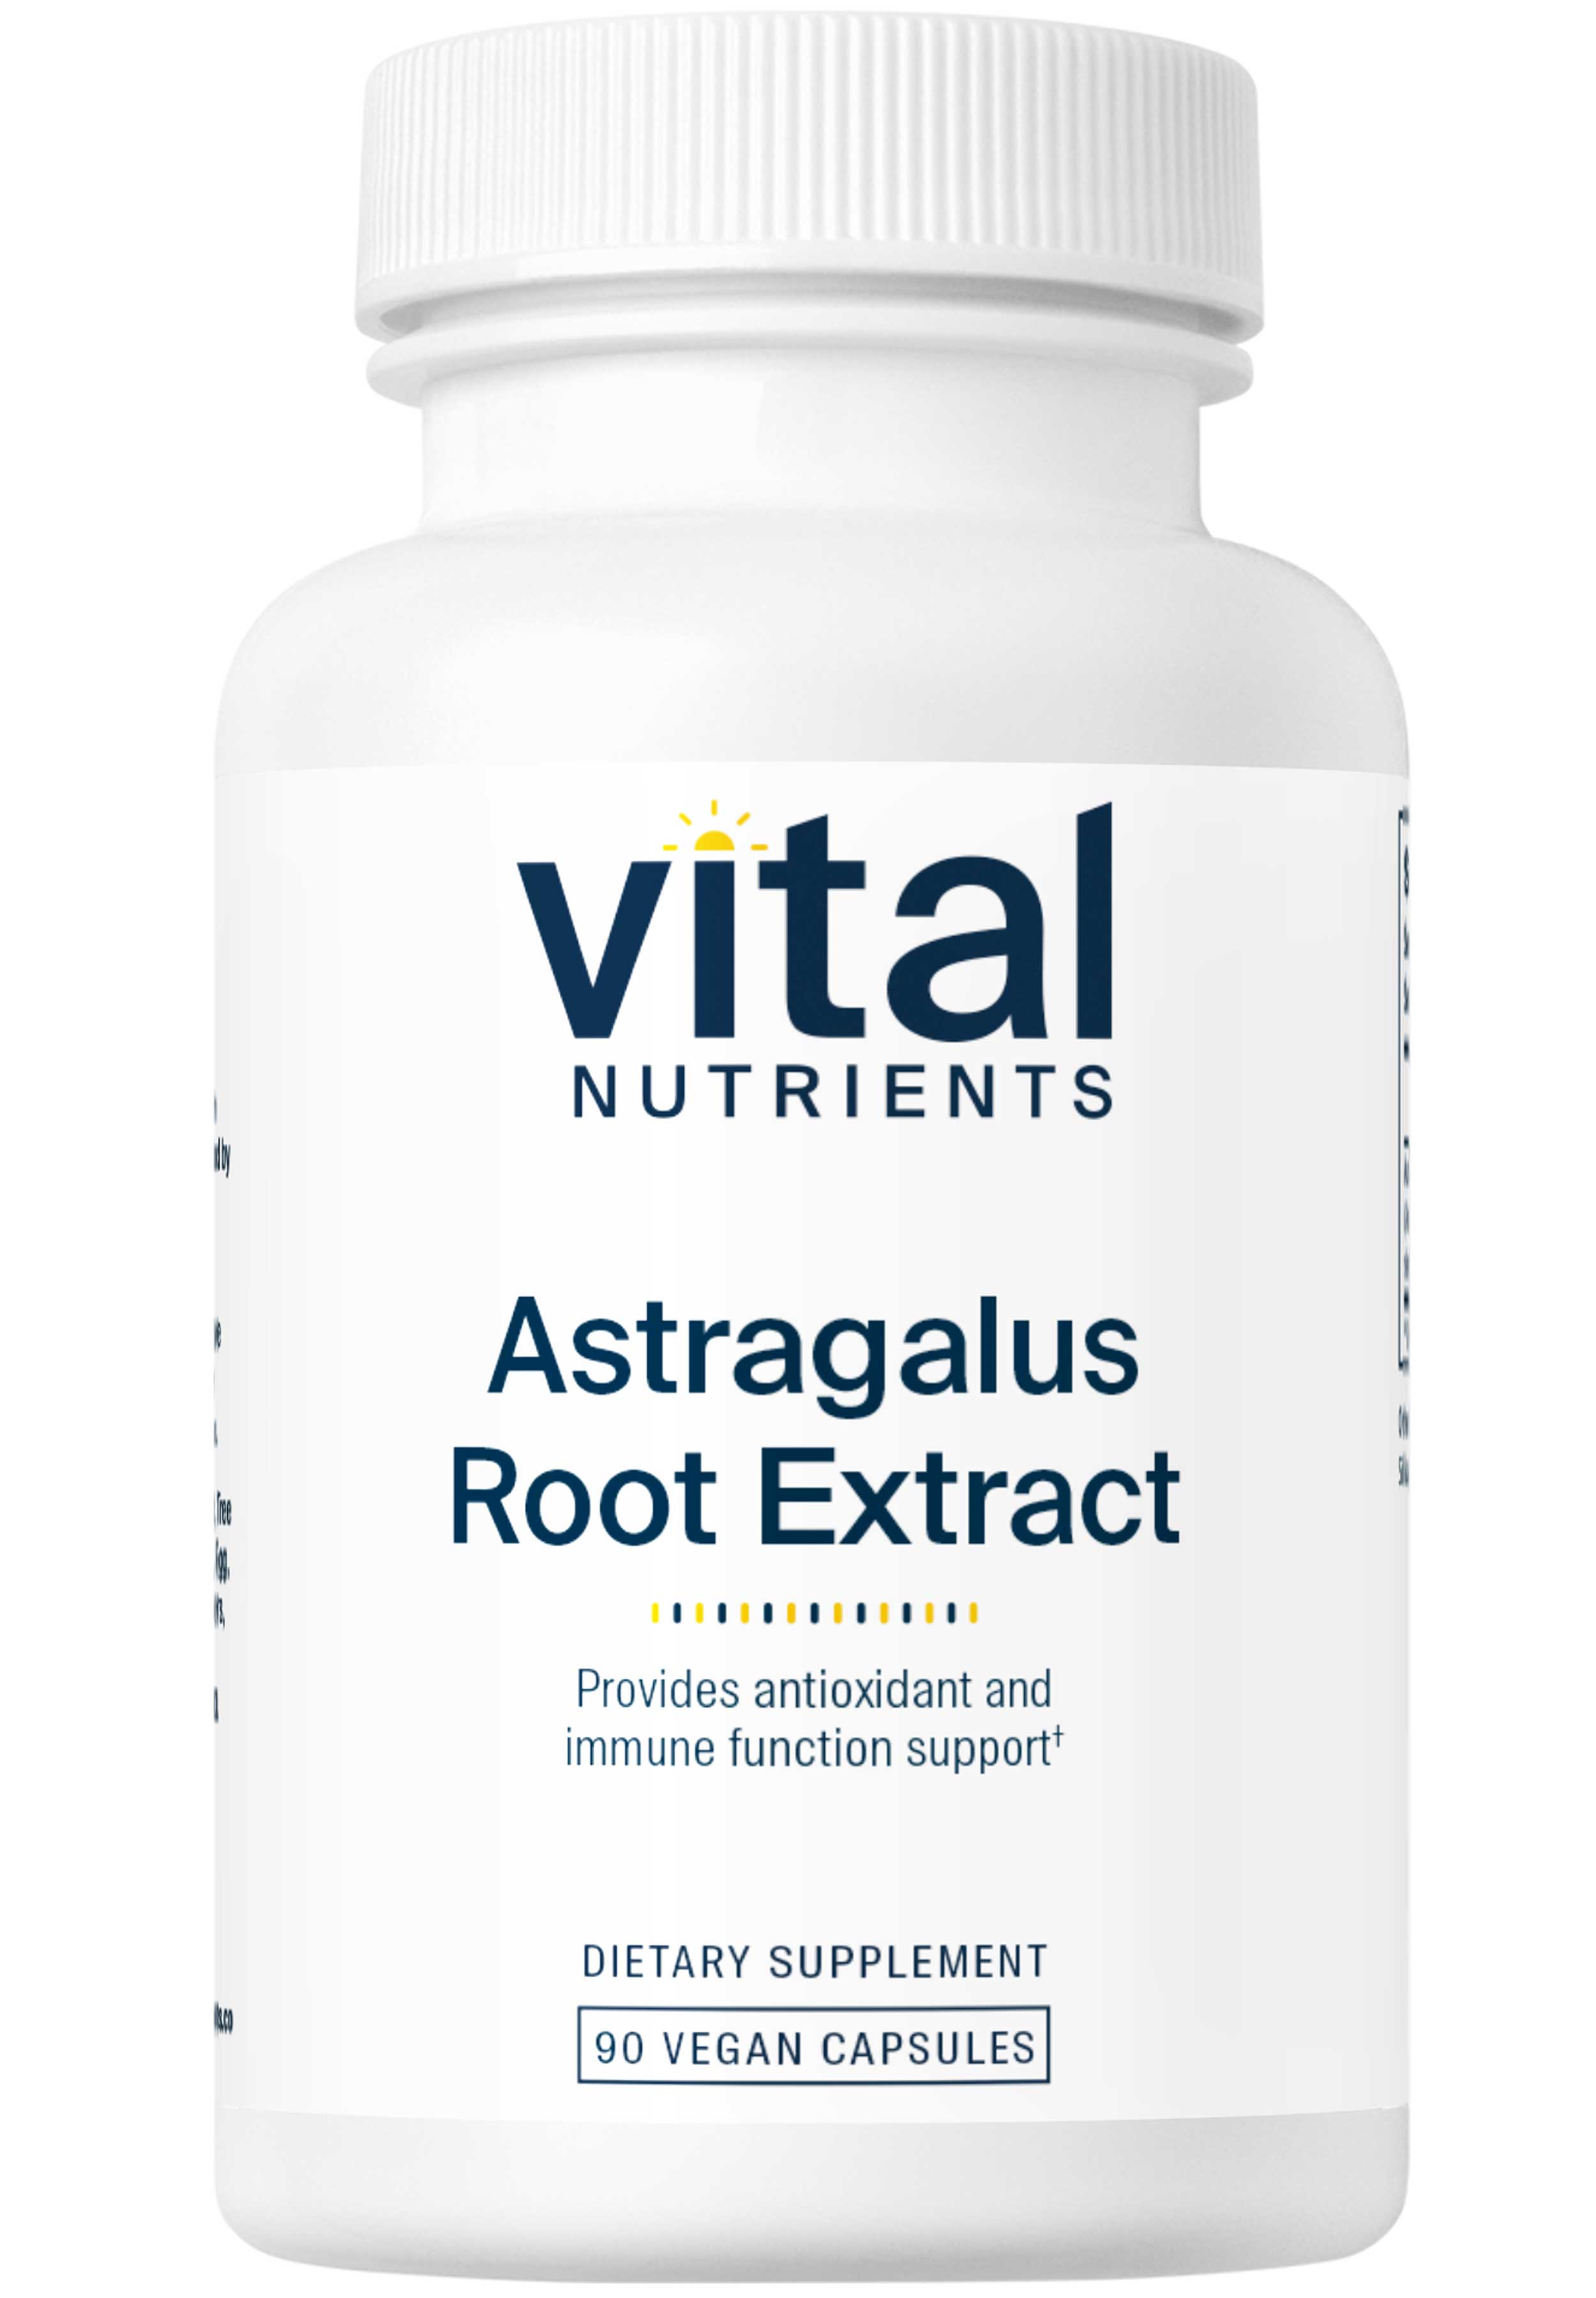 Vital Nutrients Astragalus Root Extract 300mg